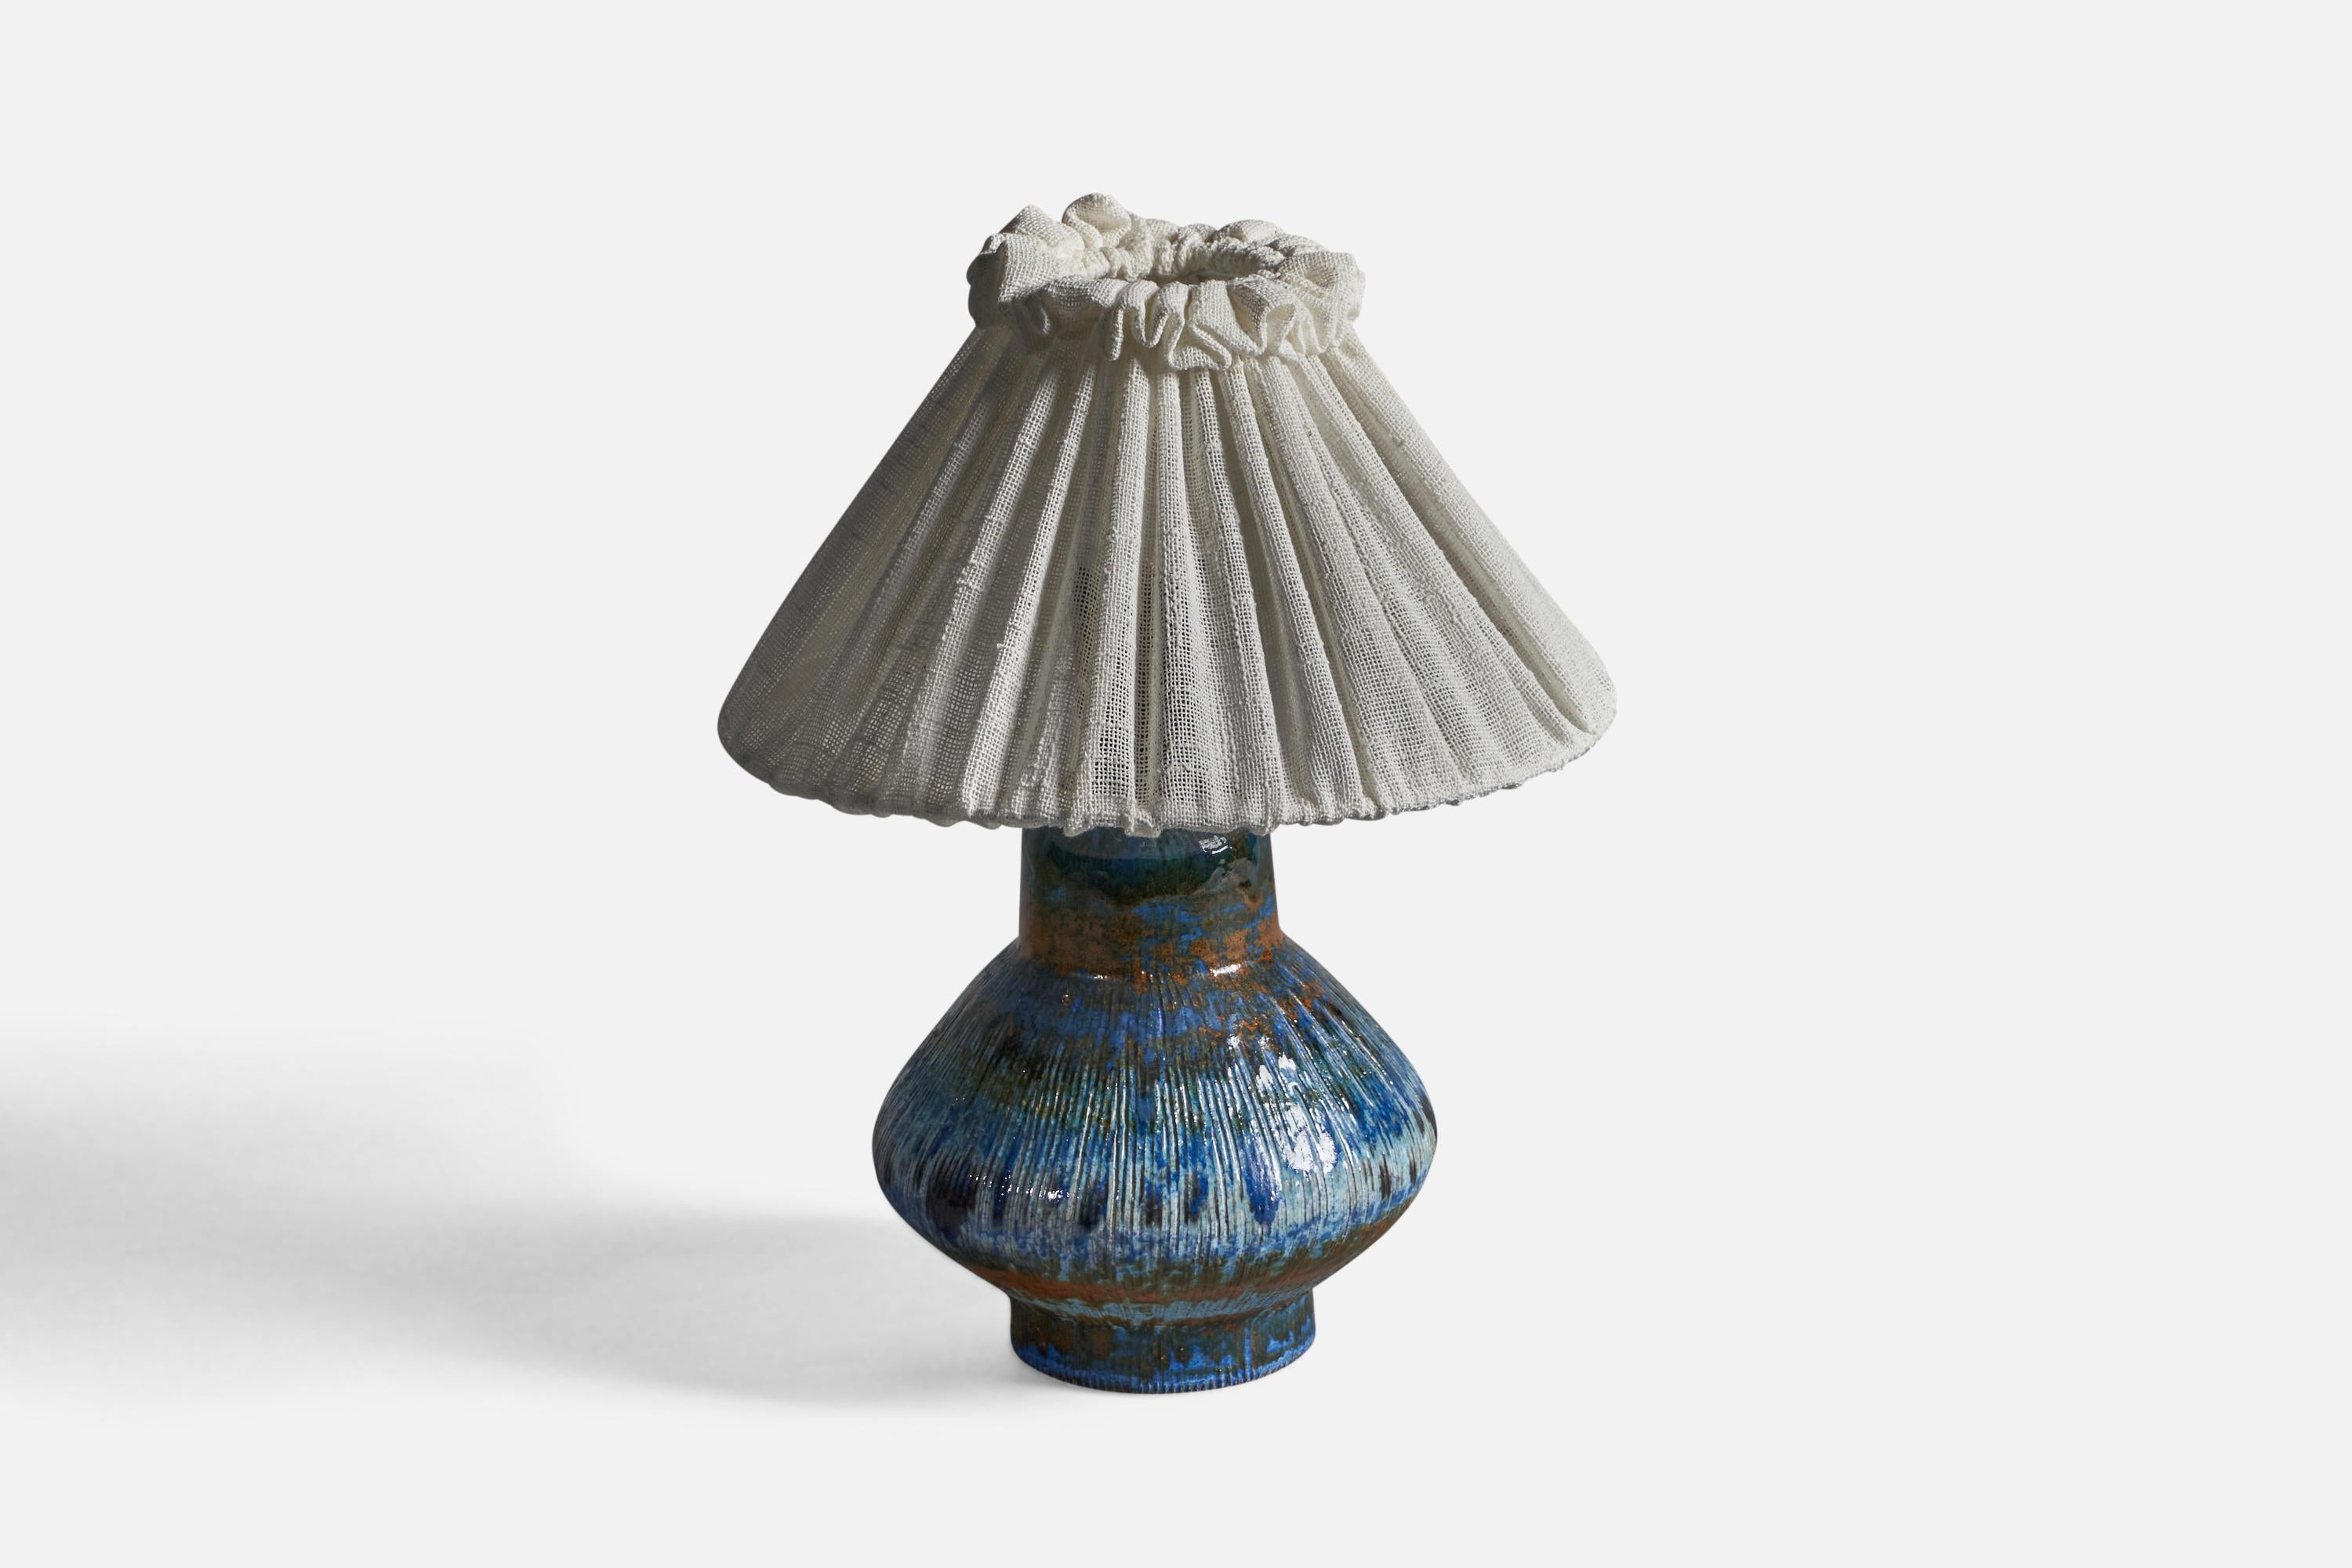 A blue red brown-glazed stoneware and fabric table lamp, designed and produced by Tilgmans, Sweden, c. 1960s.

Overall Dimensions (inches): 13.5